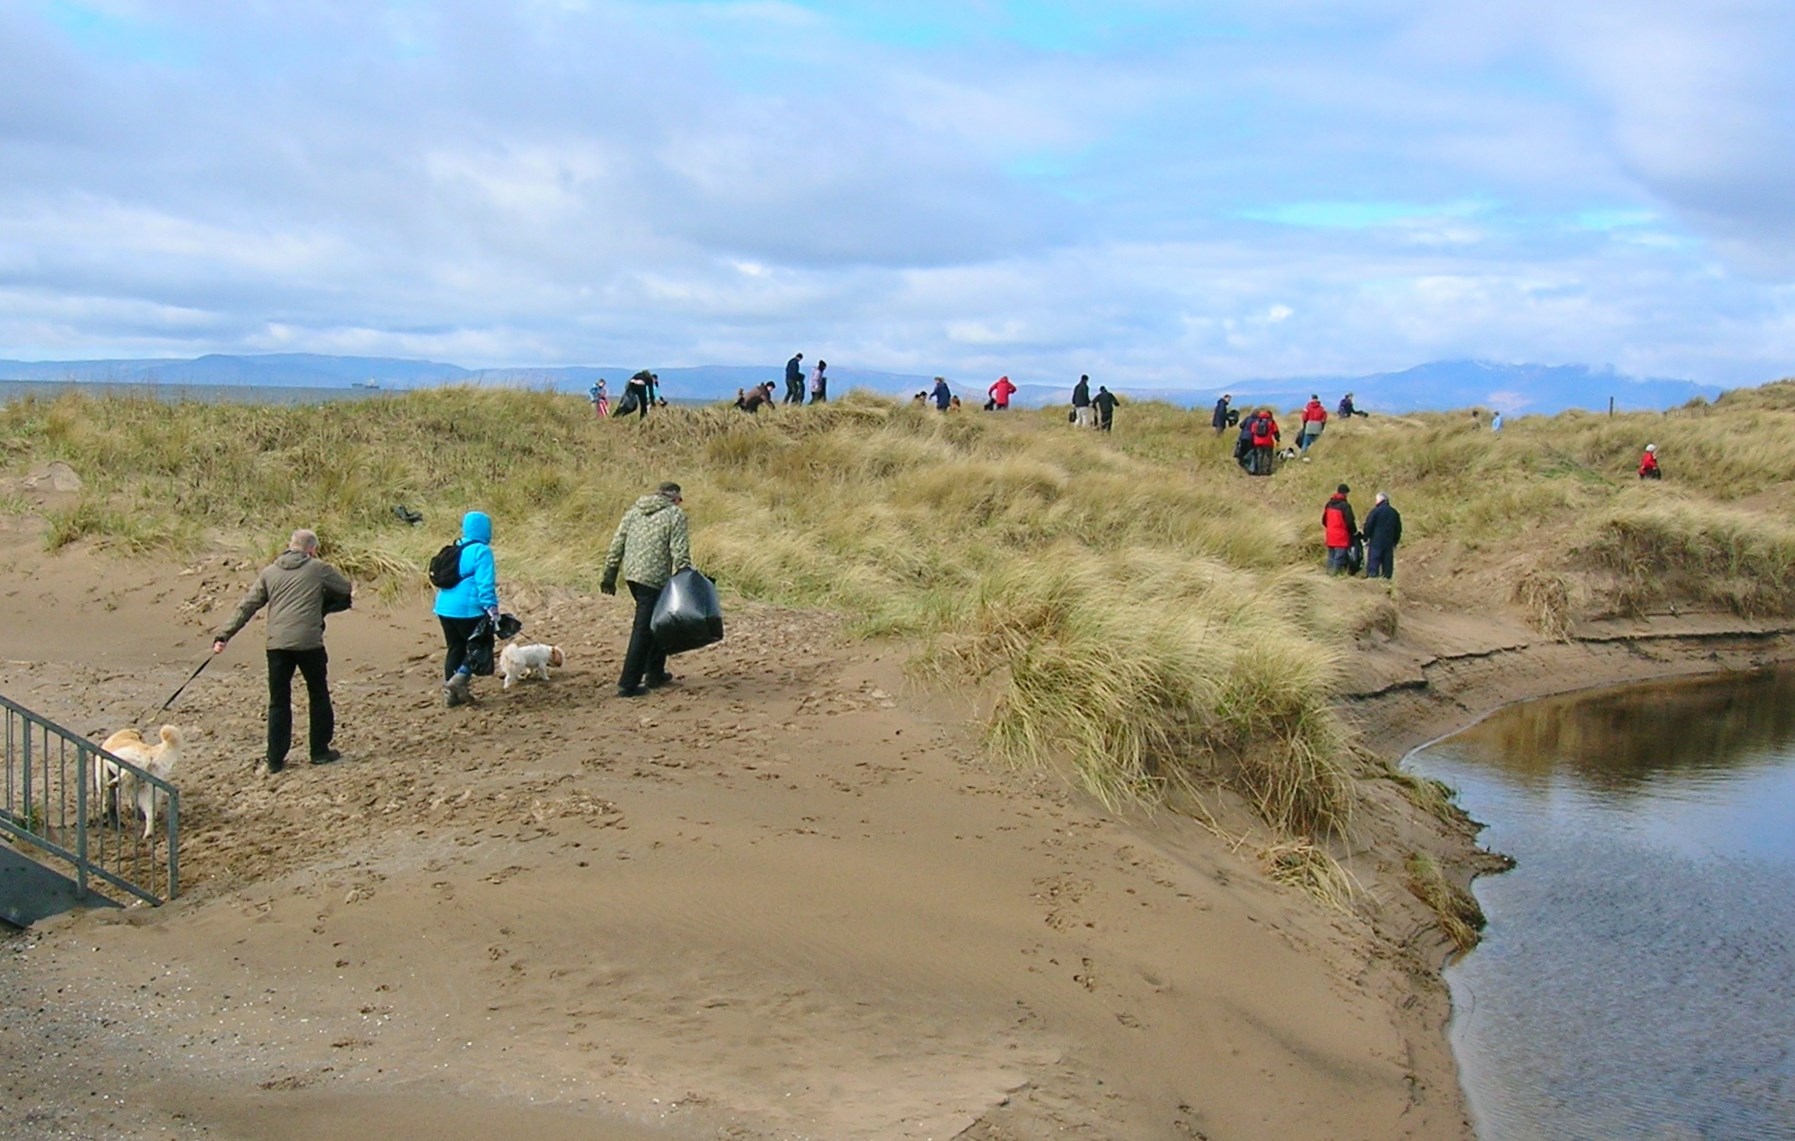 A spread out group of people cross a small bridge and fan out into sand dunes along a beach, carrying litter bags and sticks for collecting litter.